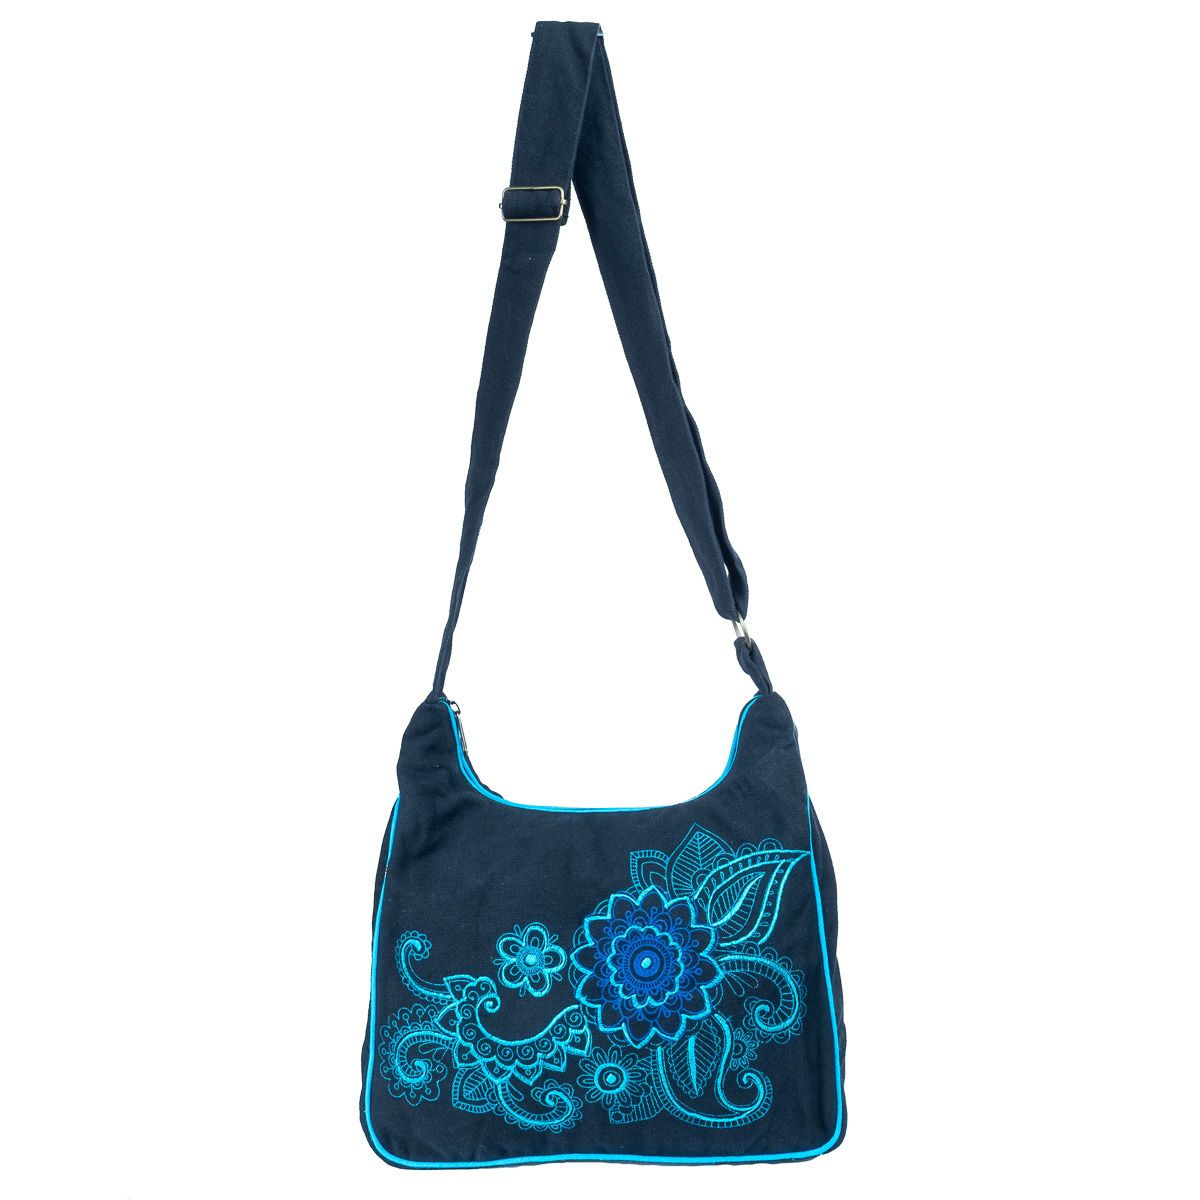 Ethno bag with embroidered flowers Albena Pirus Nepal